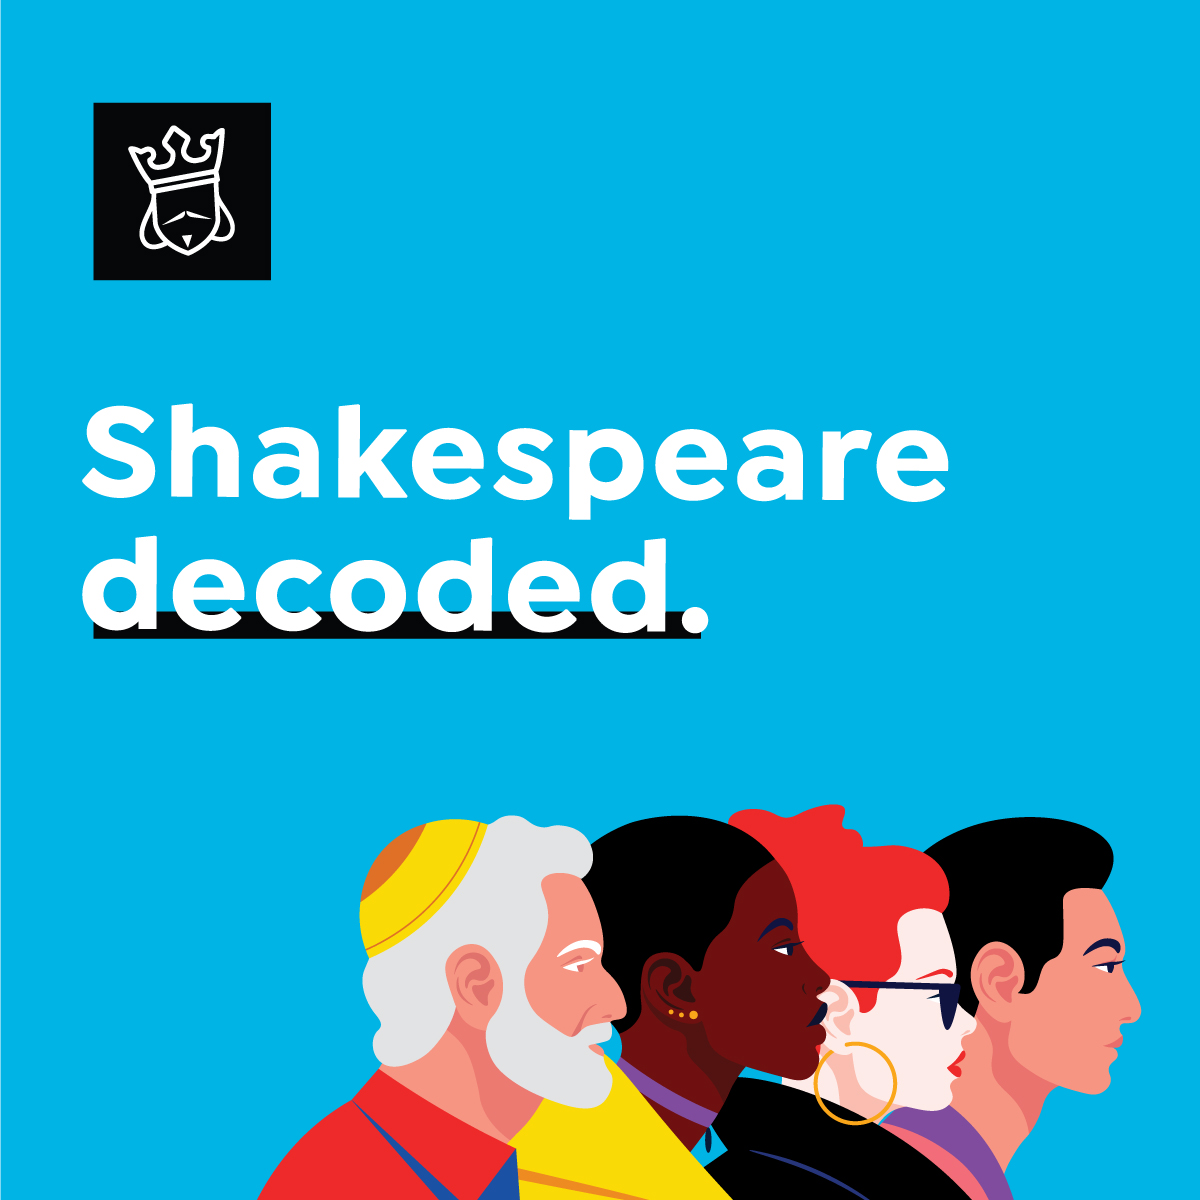 Shakespeare decoded. White test on a bright sky blue background. There are four simplified vector images of people facing right: A pale older man with white hair and beard wearing a kippah. The second is a woman with dark skin and closely shaved black hair and three gold ear piercings. Next is a very pale woman with bright red hair piled on top of her head, large gold hoops earrings, and black sunglasses. Finally an acrogenous person with peach skin and black hair in a coif.